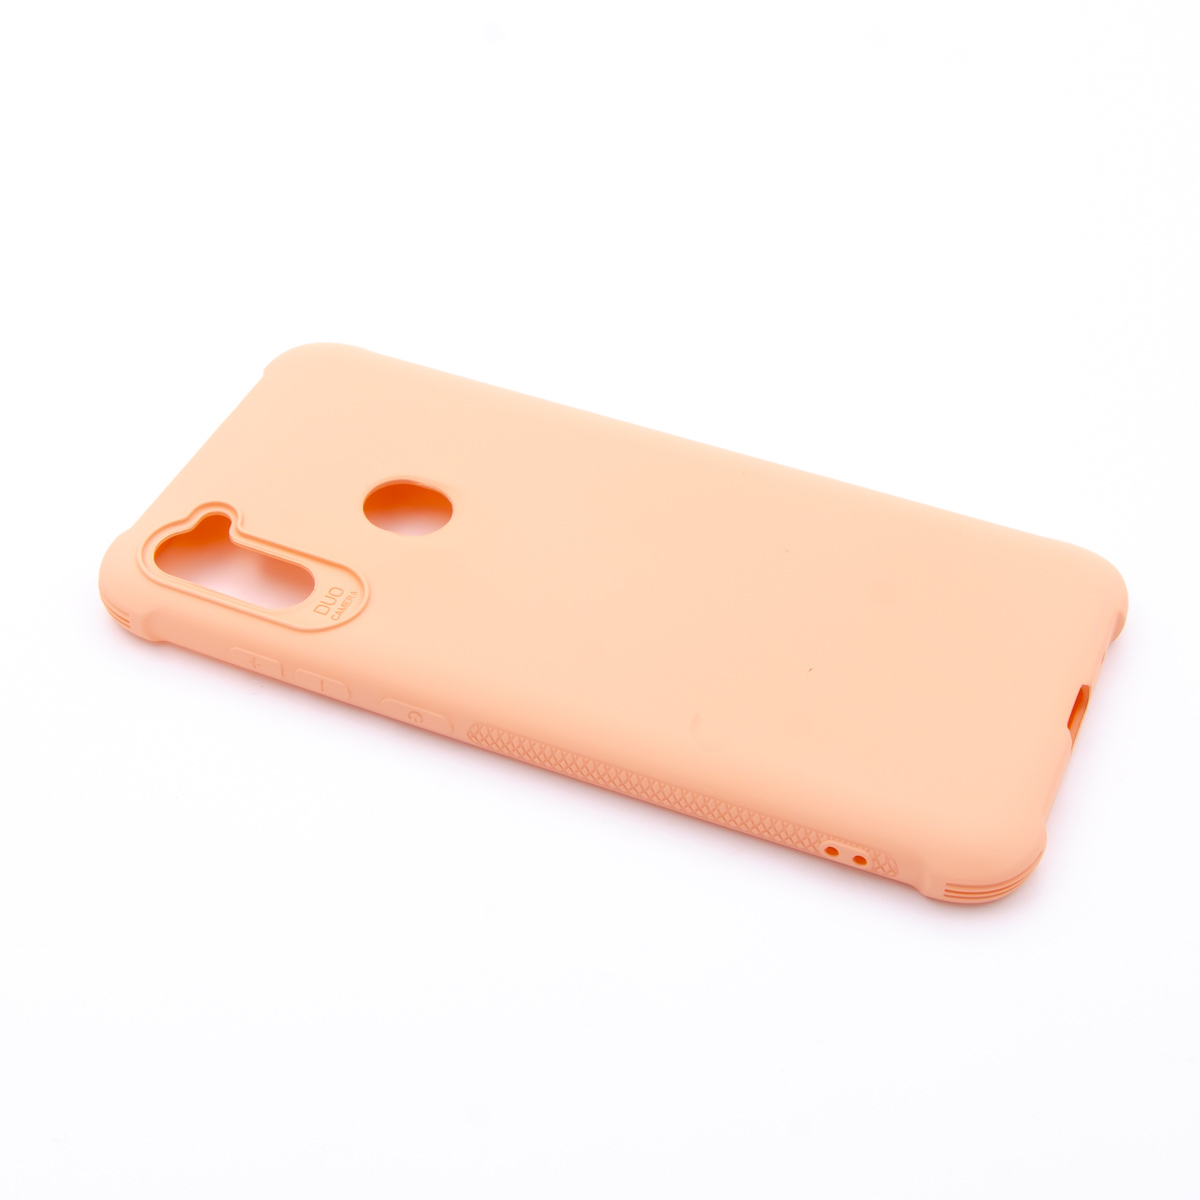 Tpu skin strong for sm-a115f (galaxy a11) roza